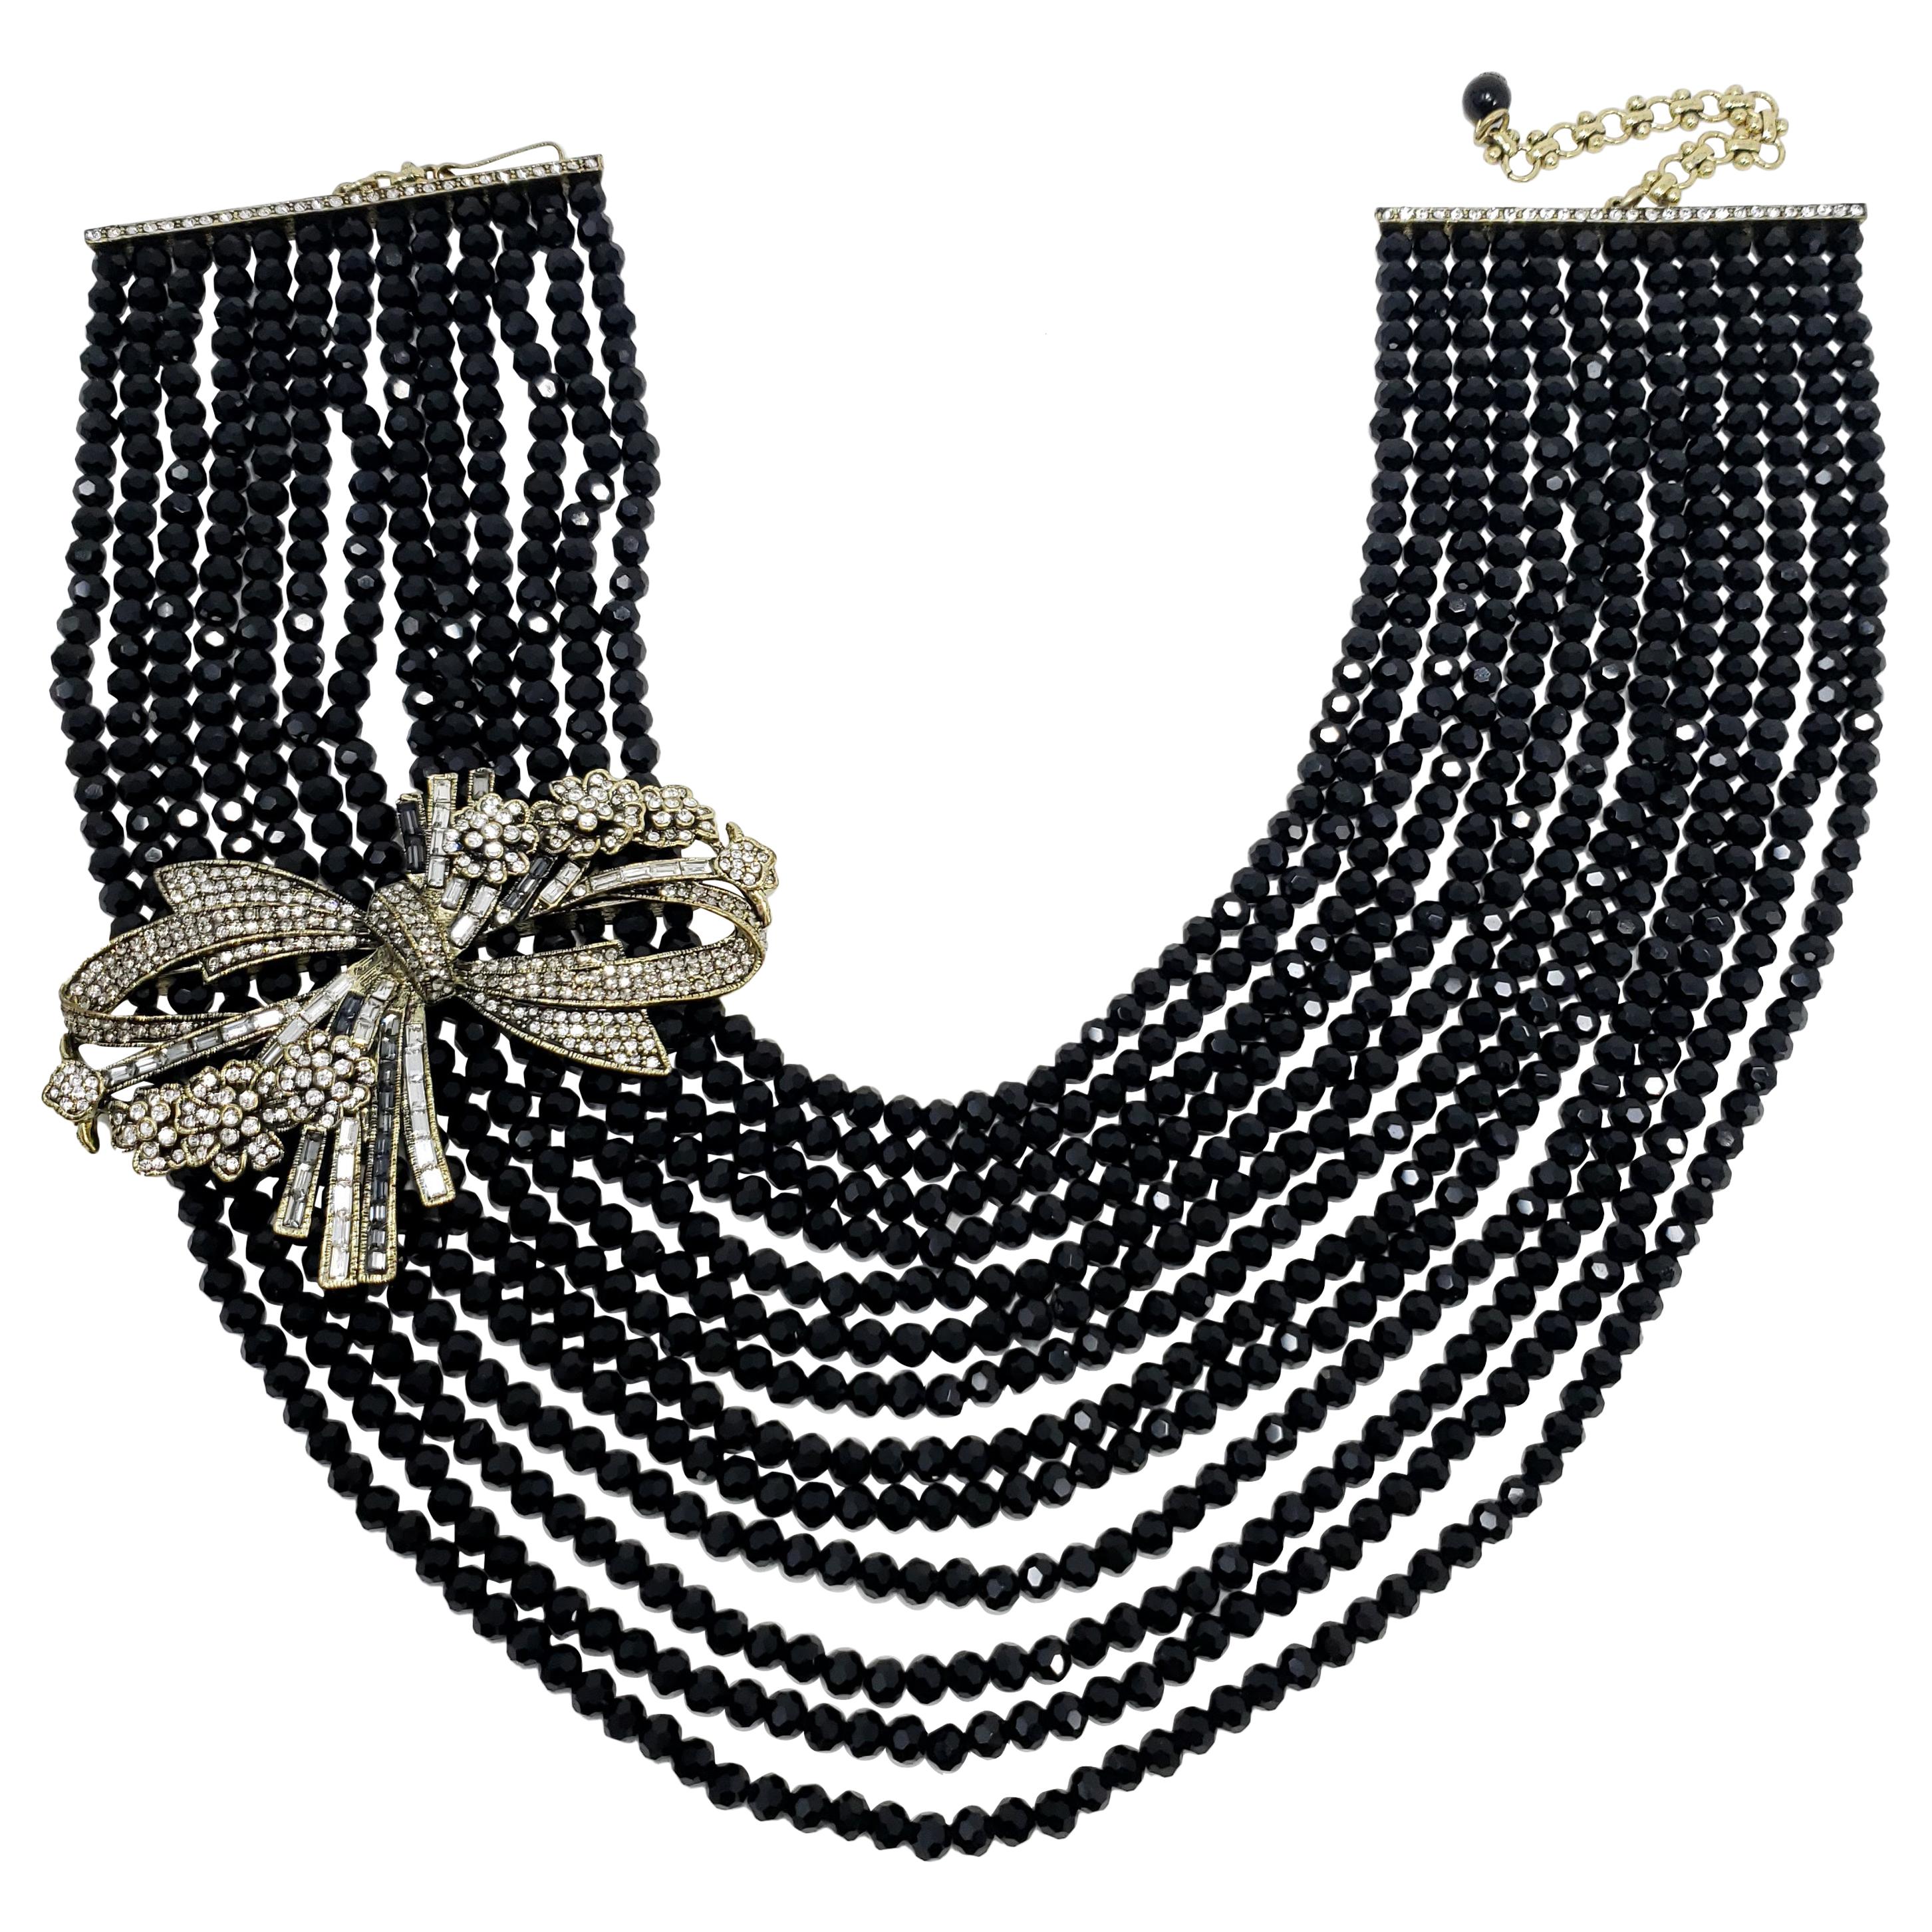 Heidi Daus Best in Bows Multi Strand Collar Necklace, Black and Clear Crystals